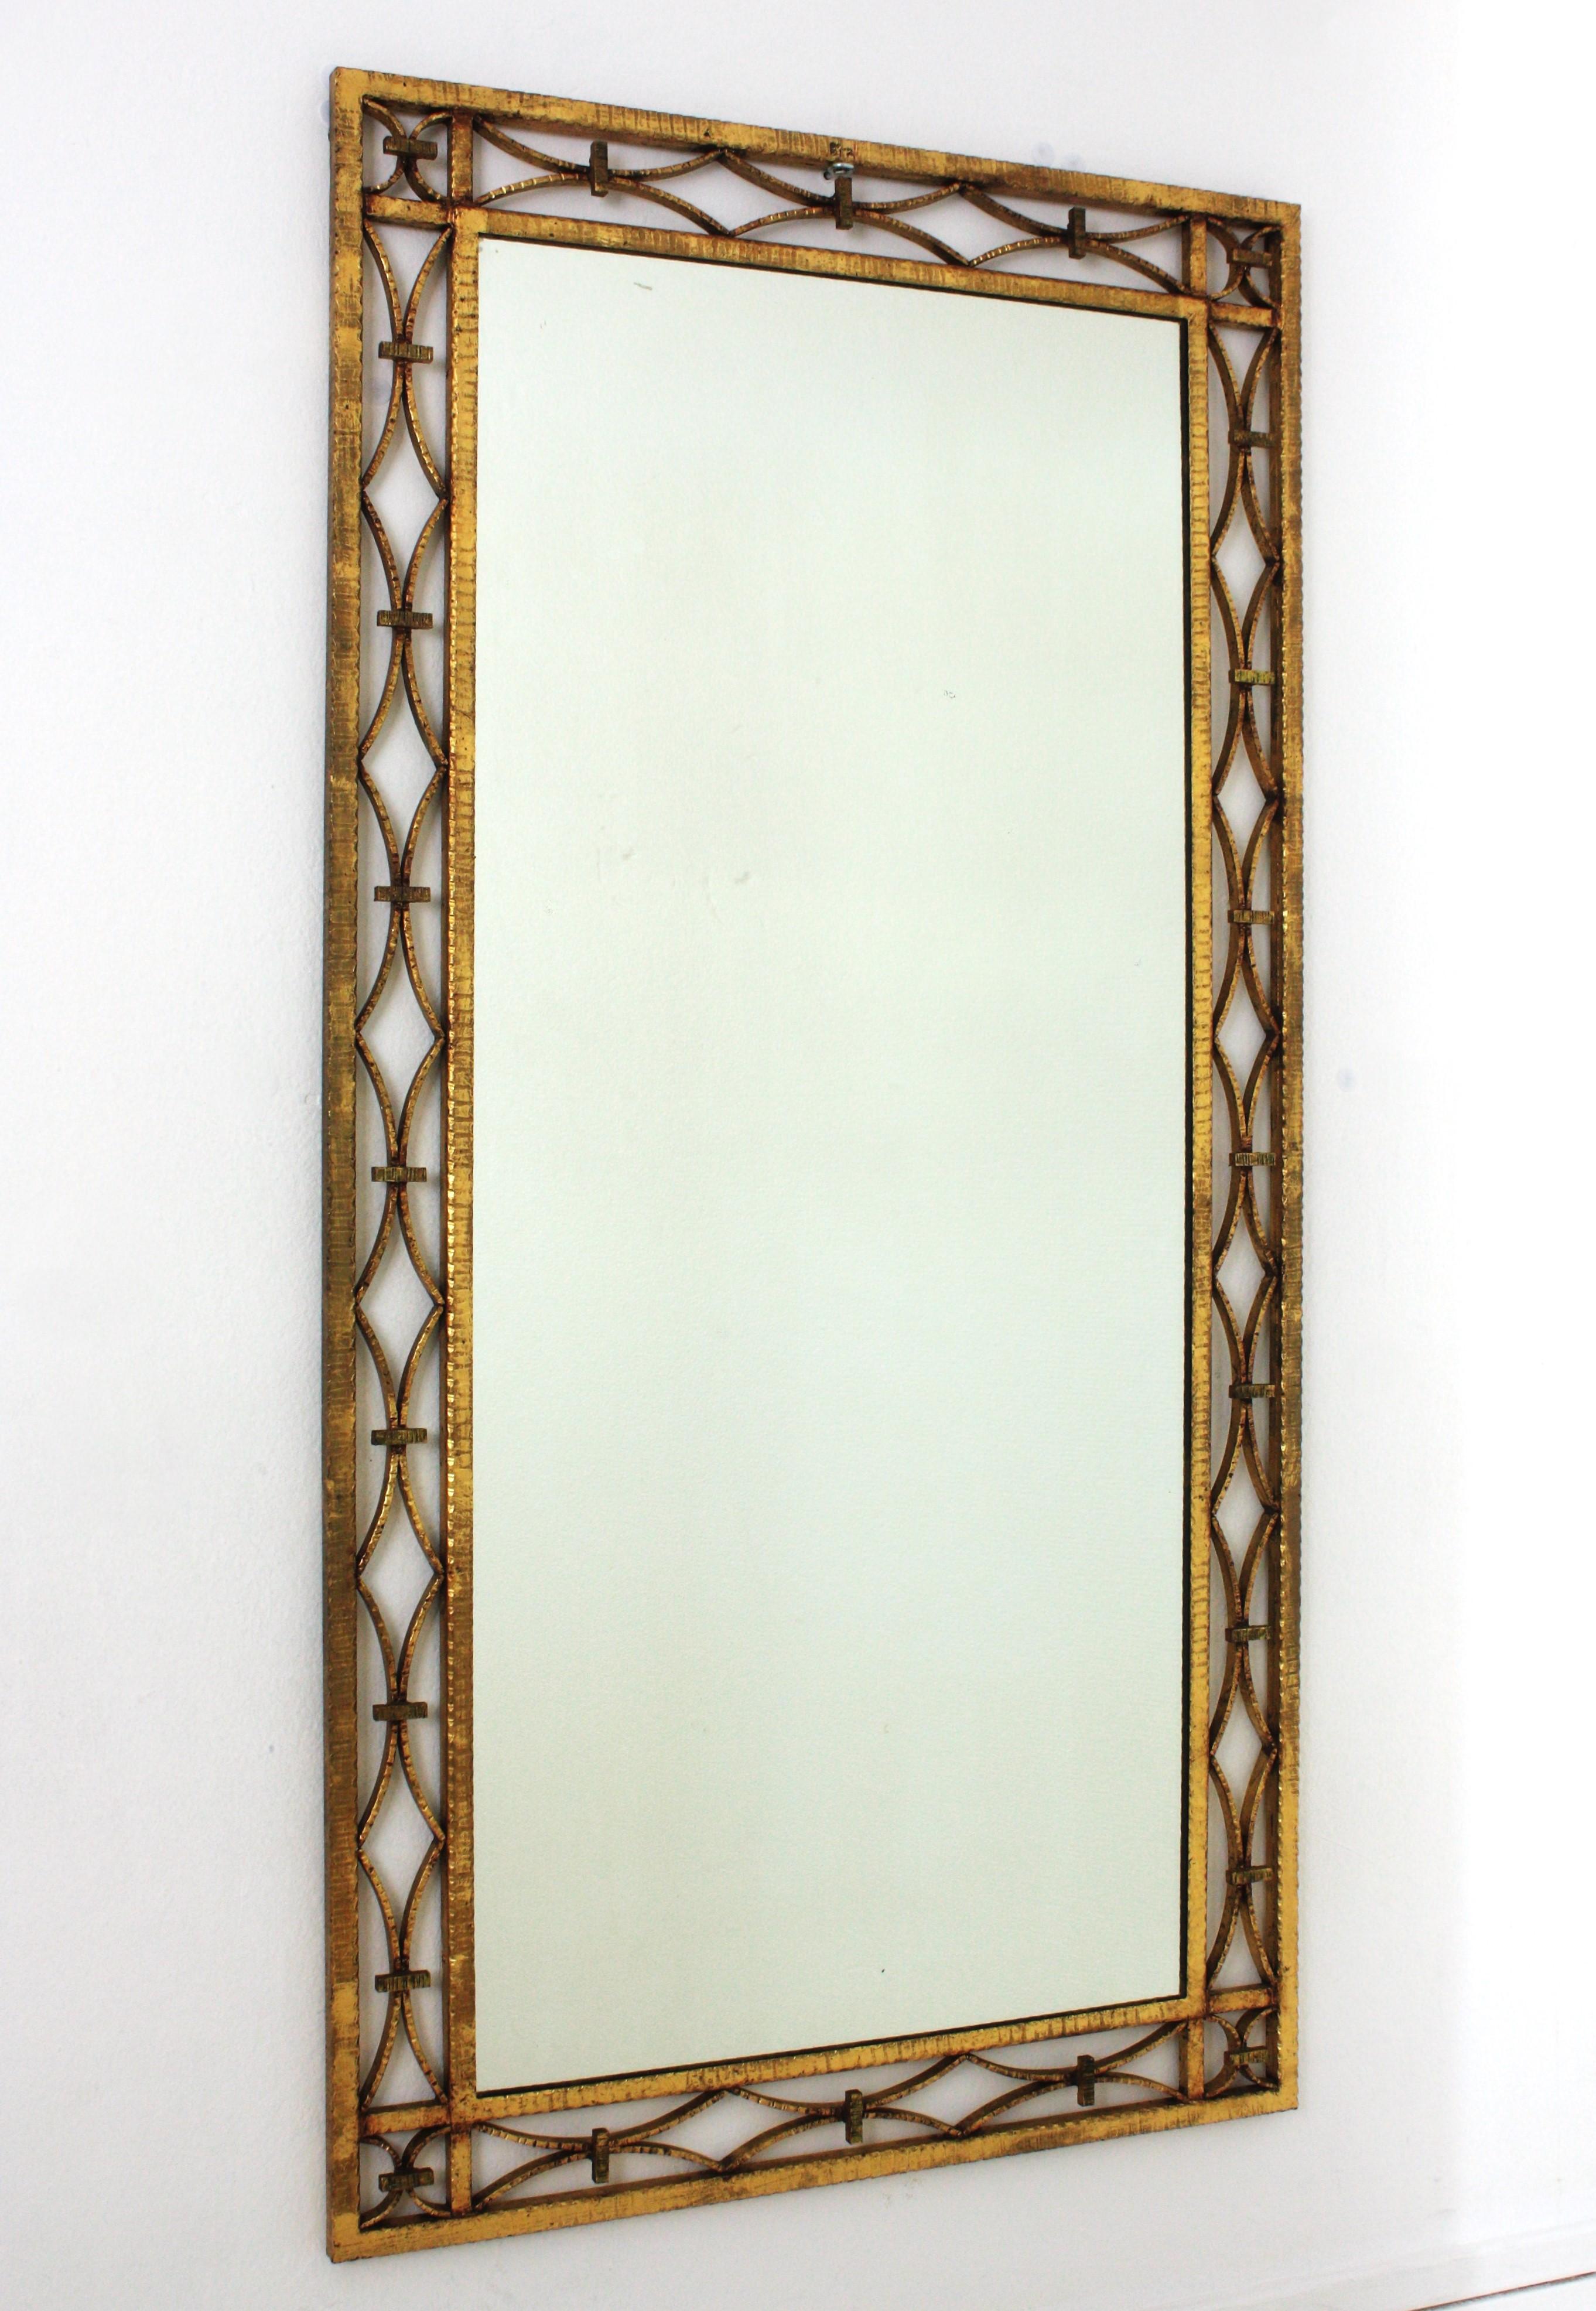 Gilt Rectangular Wall Mirror, Wrought Iron, Gold Leaf
French Art Deco wrought iron mirror with intricate geometric motifs, France, 1940s.
Eye-catching hand forged iron mirror with geometric decorations on the frame and a gorgeous design in